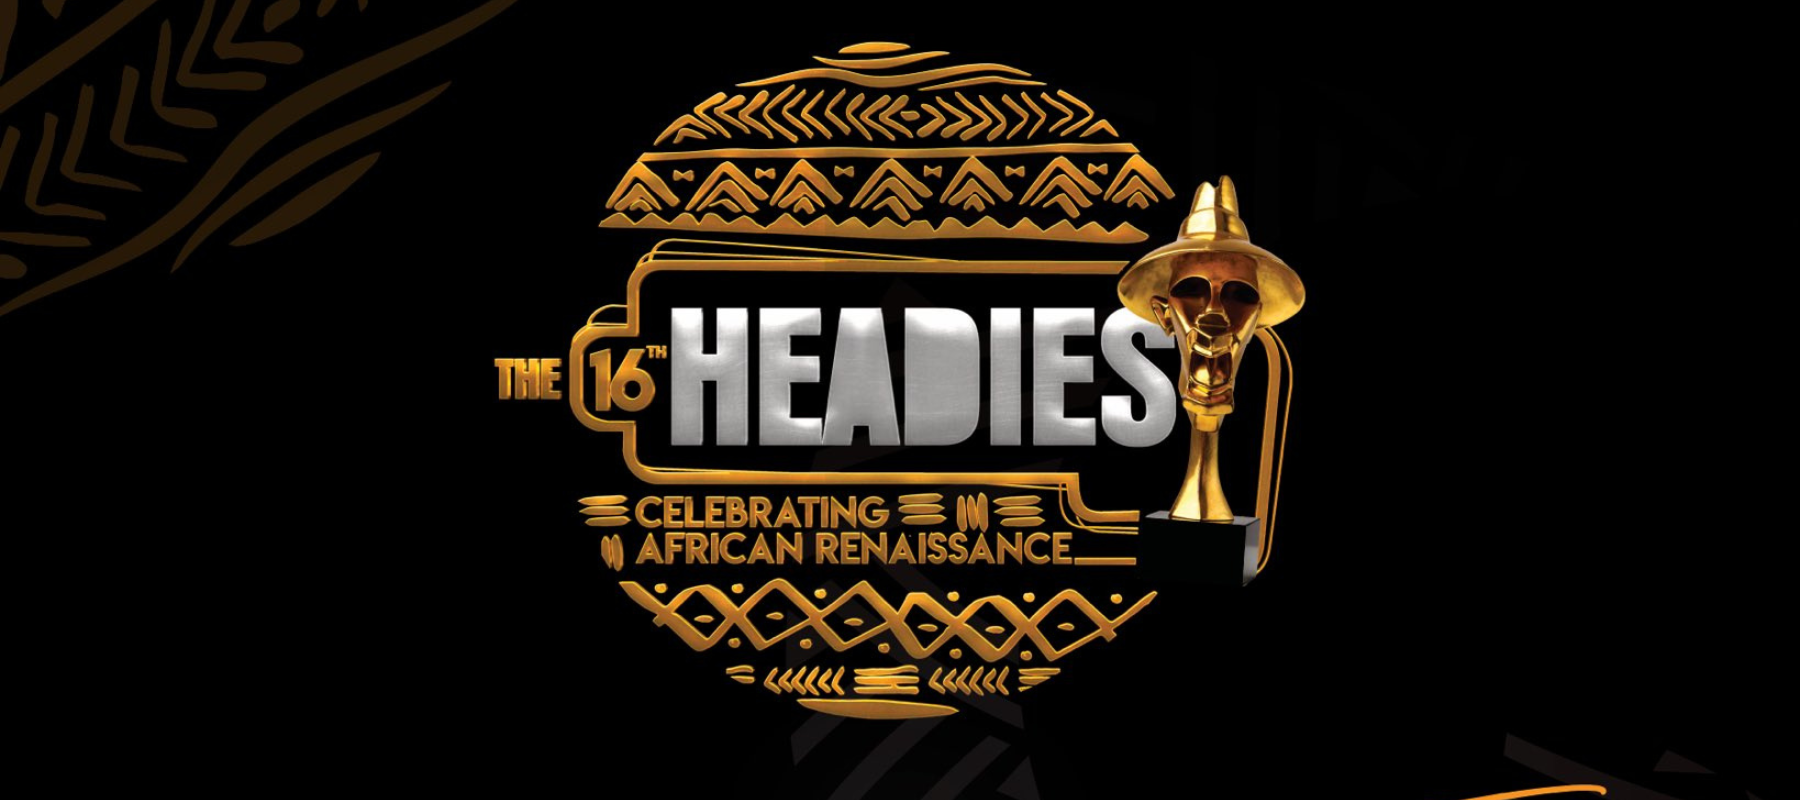 Bloody Civilian, Odumodu Blvck, Bayanni and others Nominated for 2023 Headies Rookie of the Year